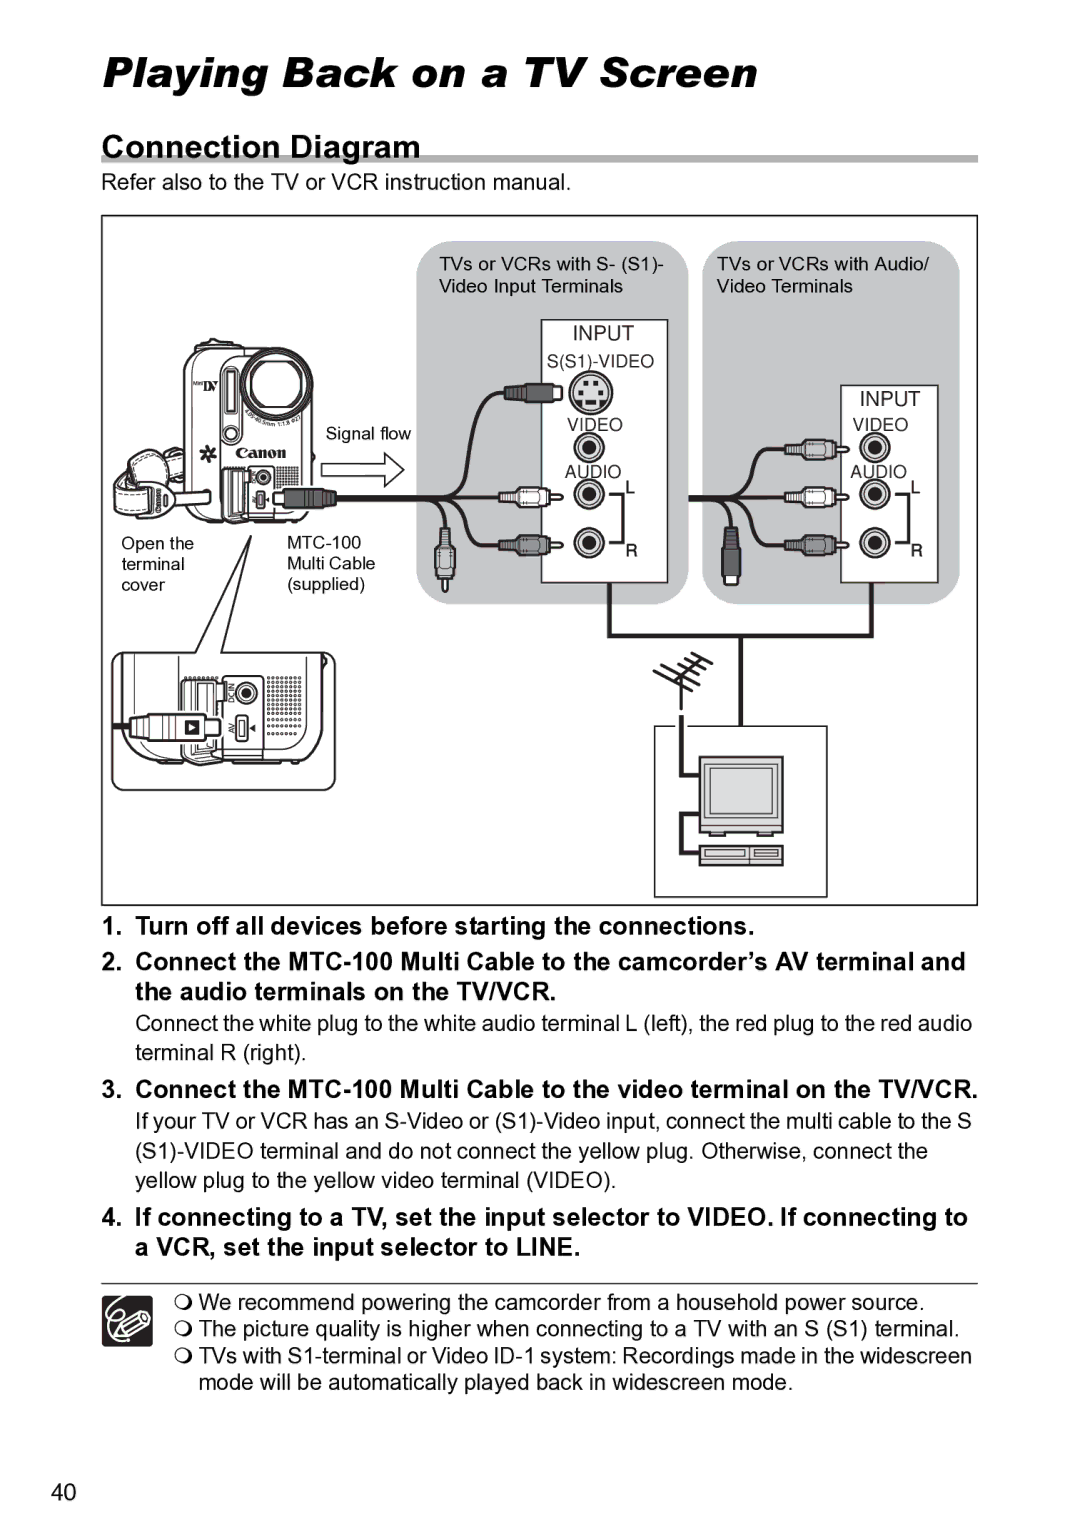 Canon S1 instruction manual Playing Back on a TV Screen, Connection Diagram 